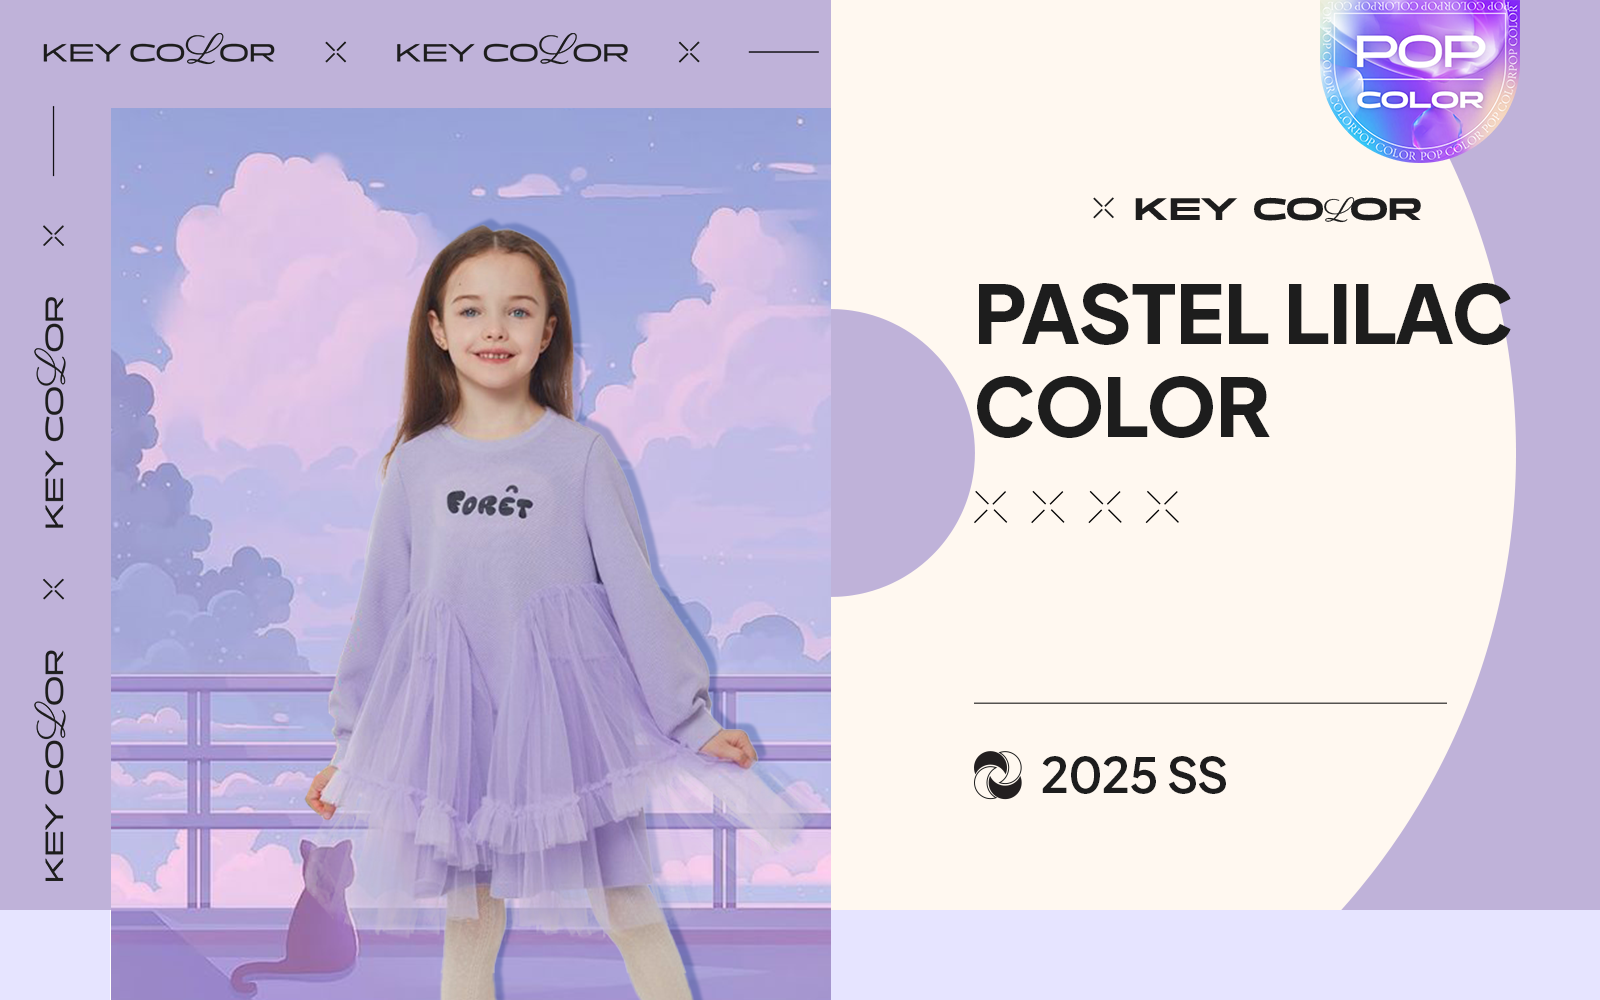 Pastel Lilac -- The Color Trend for Girlswear